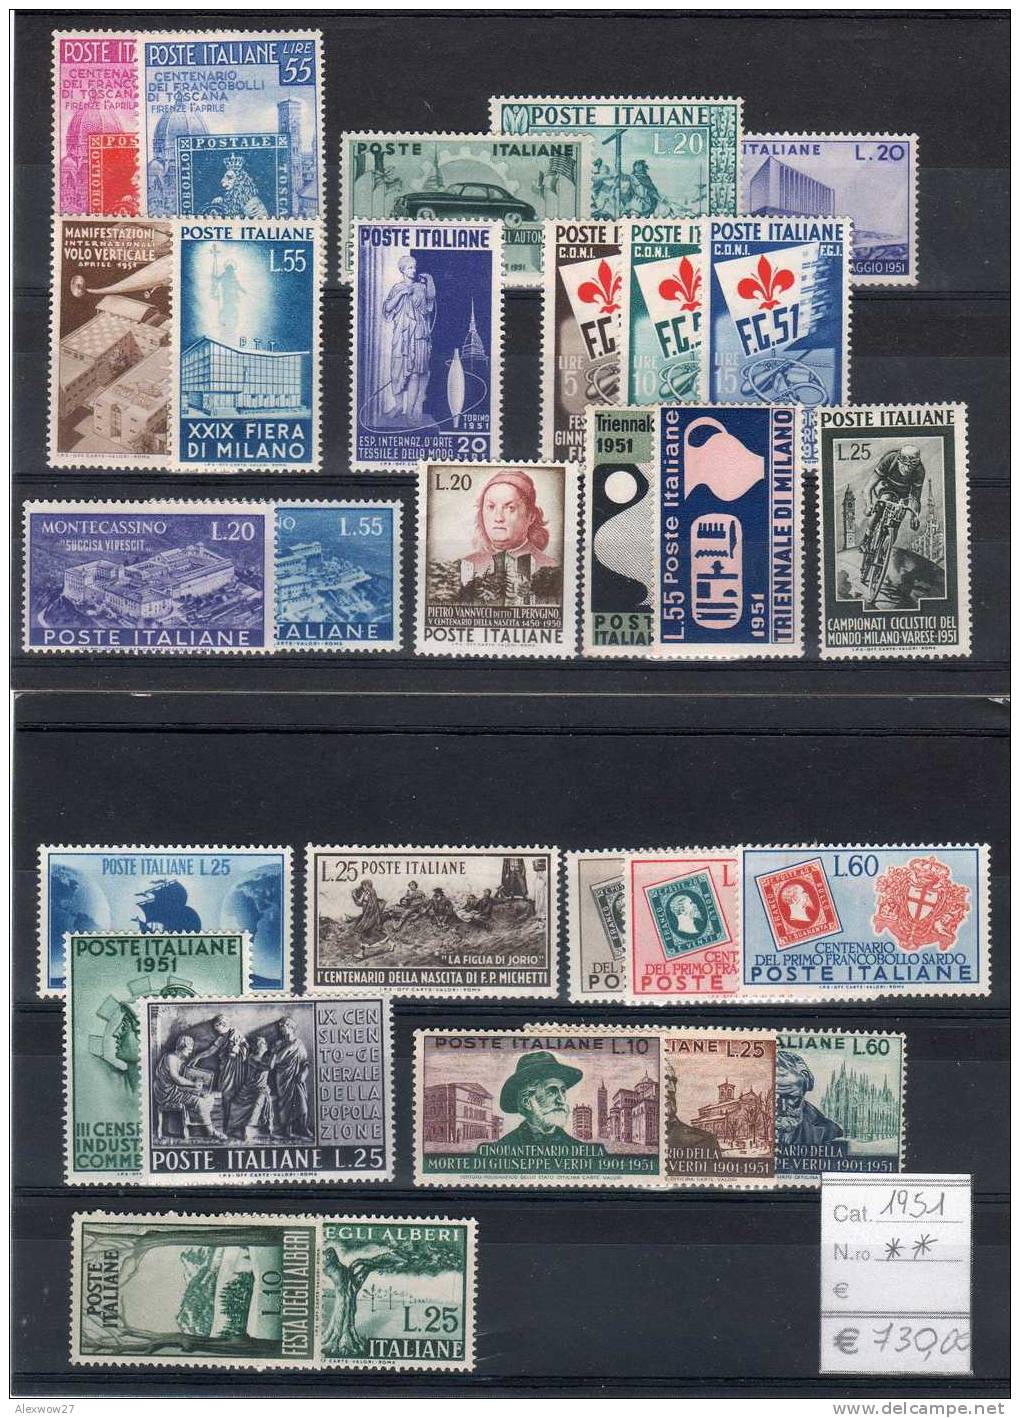 ITALIA / ITALY 1951 --ANNATA COMPLETA -- YEARS COMPLETE ** MNH ..LUX - Années Complètes